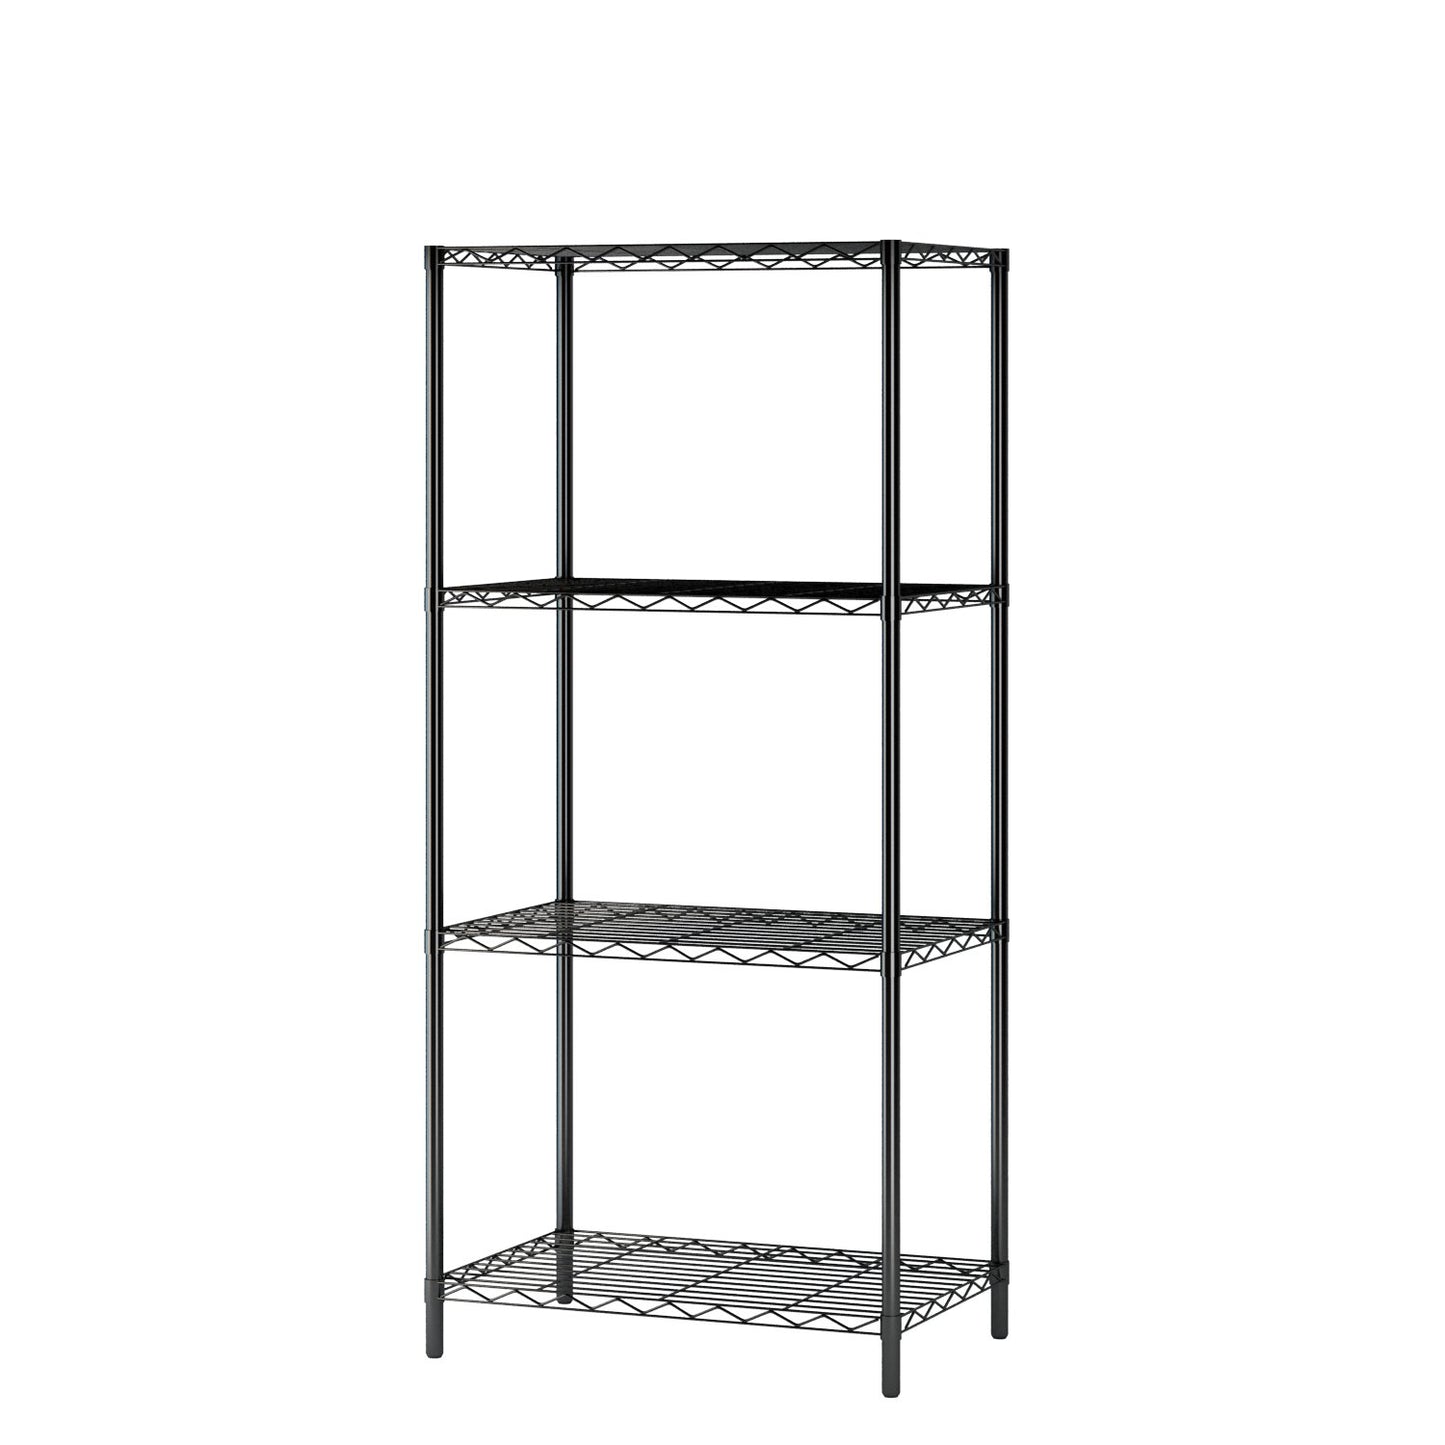 Homebi 4-Tier Wire Shelving 4 Shelves Unit Metal Storage Rack Durable Organizer Perfect for Pantry Closet Kitchen Laundry Organization in Black,21”Wx14”Dx46.5”H